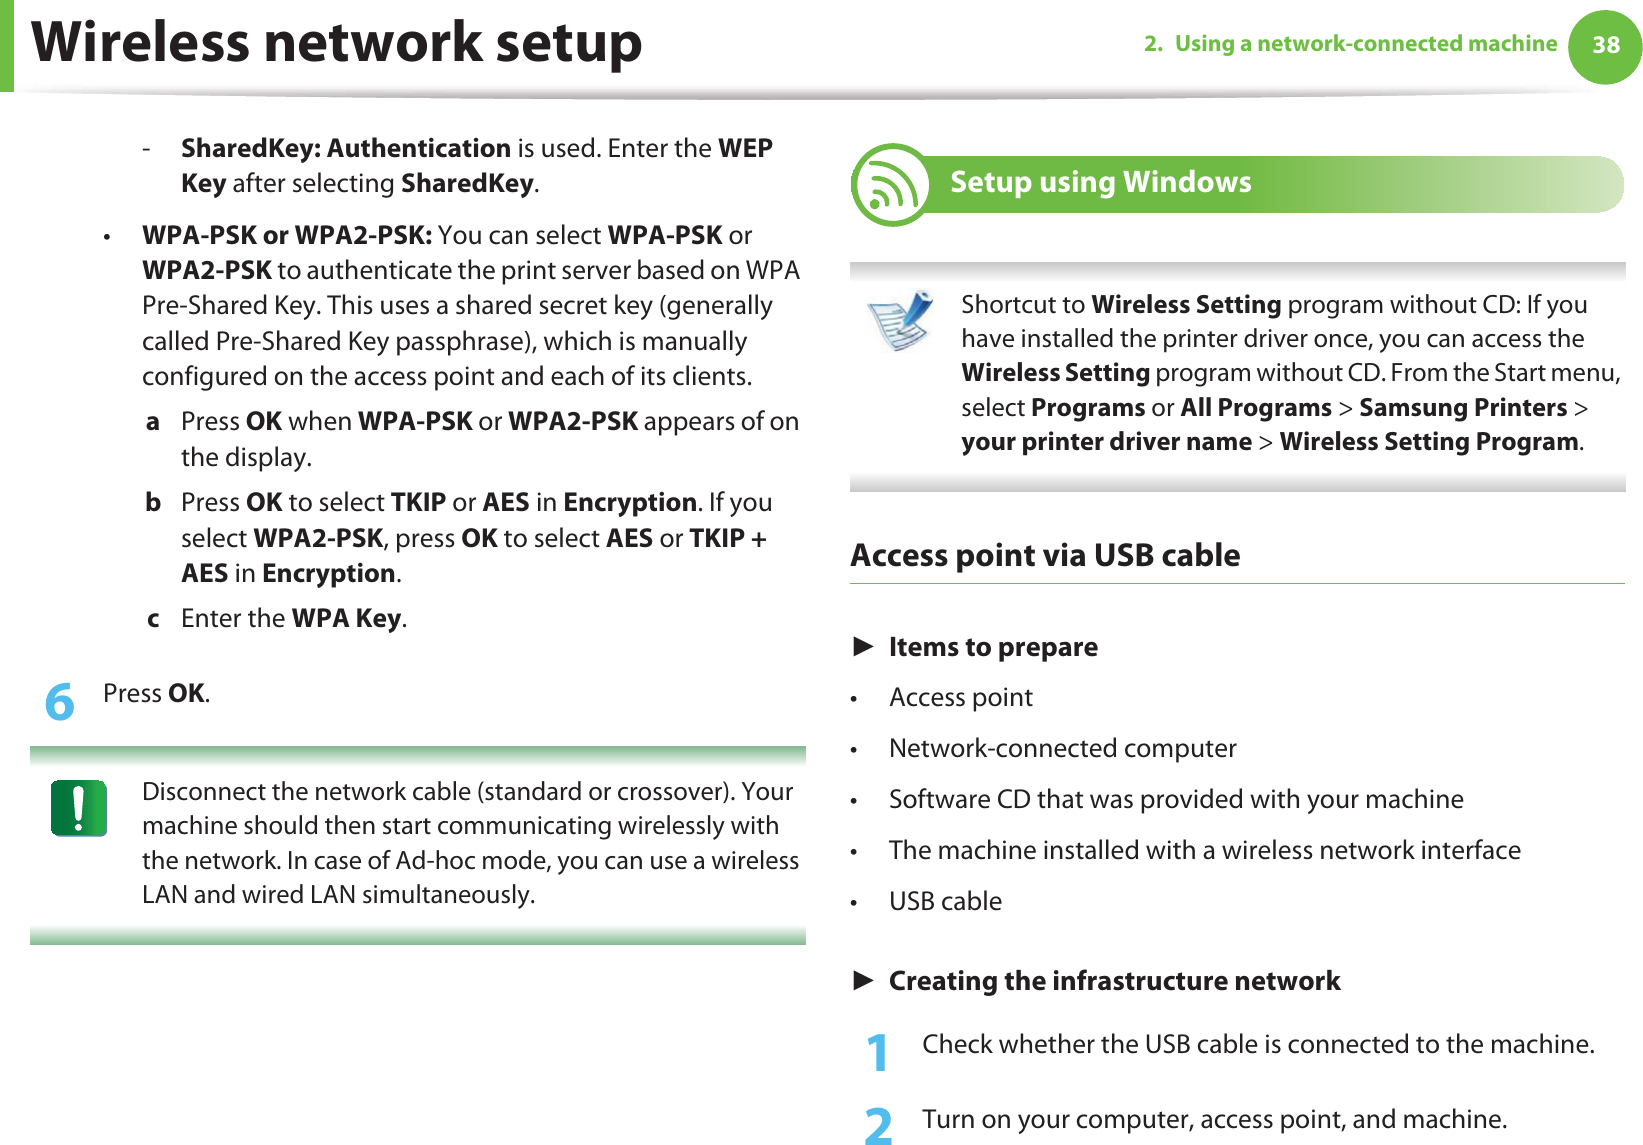 Wireless network setup 382. Using a network-connected machine-SharedKey: Authentication is used. Enter the WEP Key after selecting SharedKey.•WPA-PSK or WPA2-PSK: You can select WPA-PSK or WPA2-PSK to authenticate the print server based on WPA Pre-Shared Key. This uses a shared secret key (generally called Pre-Shared Key passphrase), which is manually configured on the access point and each of its clients.a  Press OK when WPA-PSK or WPA2-PSK appears of on the display.b  Press OK to select TKIP or AES in Encryption. If you select WPA2-PSK, press OK to select AES or TKIP + AES in Encryption.c  Enter the WPA Key.6  Press OK. Disconnect the network cable (standard or crossover). Your machine should then start communicating wirelessly with the network. In case of Ad-hoc mode, you can use a wireless LAN and wired LAN simultaneously. 16 Setup using Windows Shortcut to Wireless Setting program without CD: If you have installed the printer driver once, you can access the Wireless Setting program without CD. From the Start menu, select Programs or All Programs &gt; Samsung Printers &gt; your printer driver name &gt; Wireless Setting Program. Access point via USB cableŹItems to prepare•Access point• Network-connected computer• Software CD that was provided with your machine• The machine installed with a wireless network interface•USB cableŹCreating the infrastructure network1Check whether the USB cable is connected to the machine.2  Turn on your computer, access point, and machine.